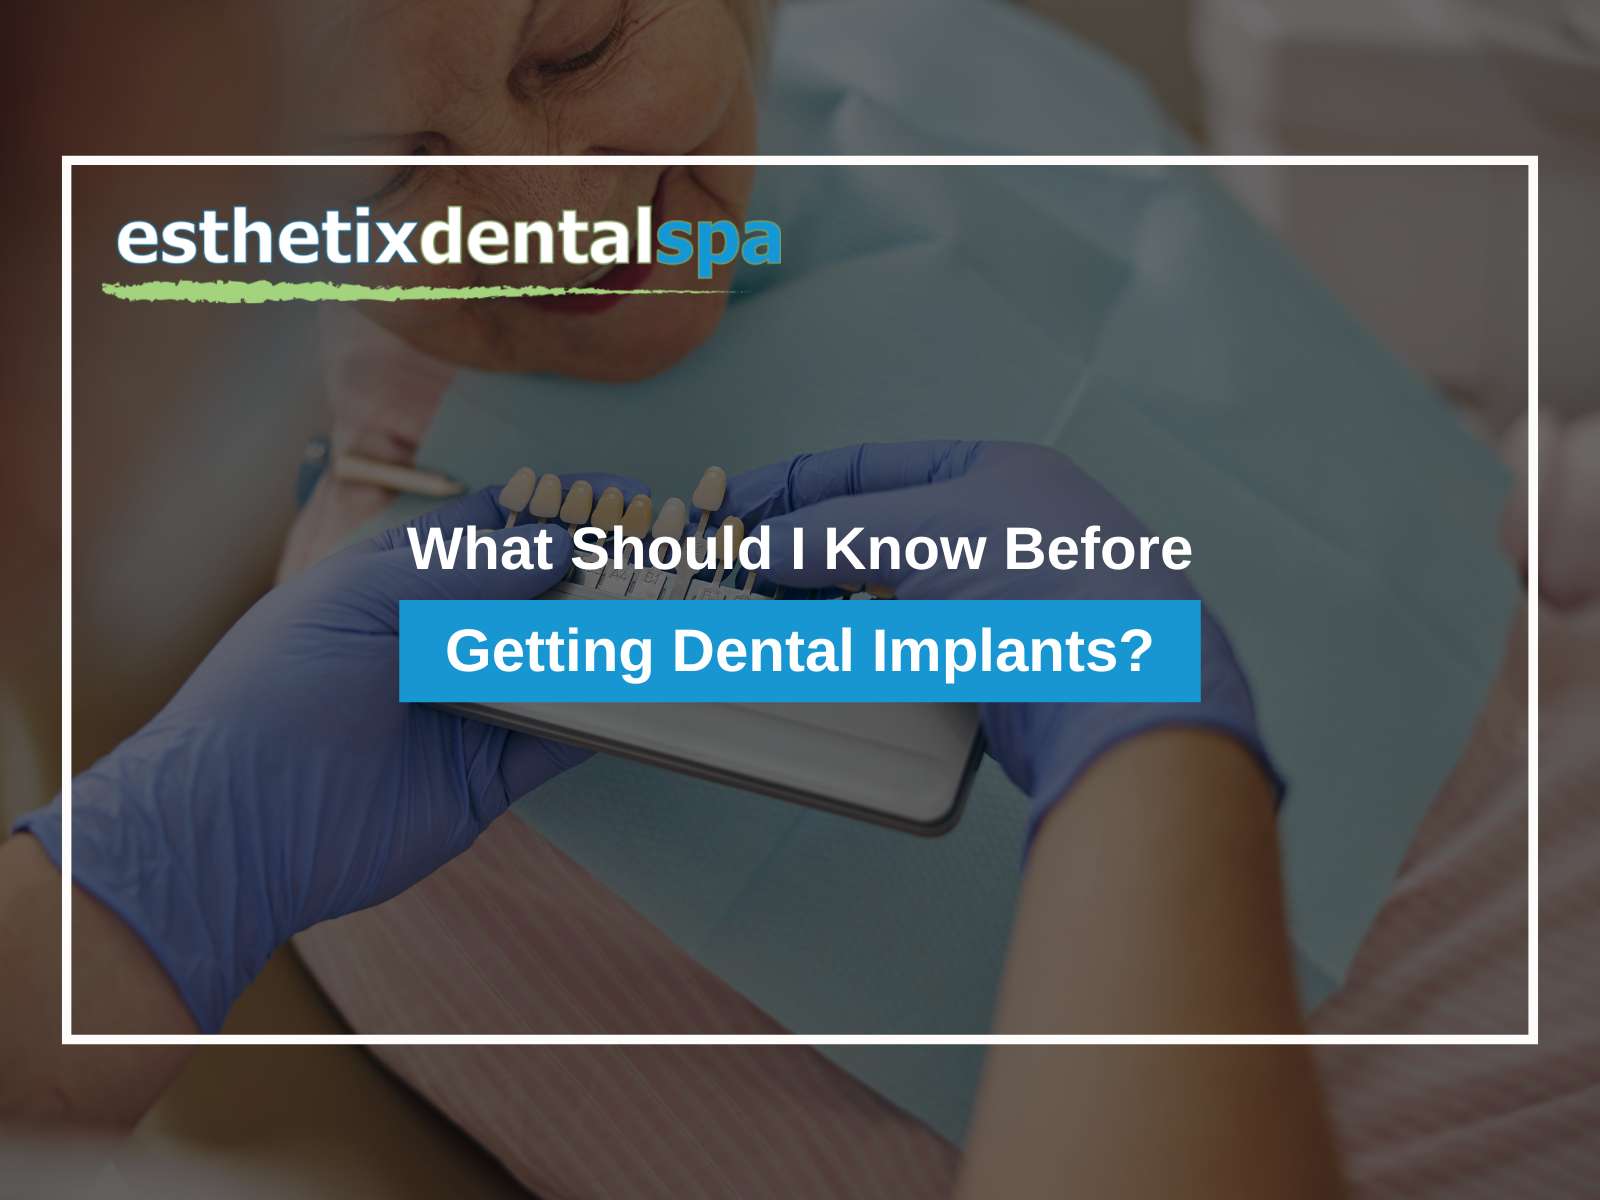 What Should I Know Before Getting Dental Implants?